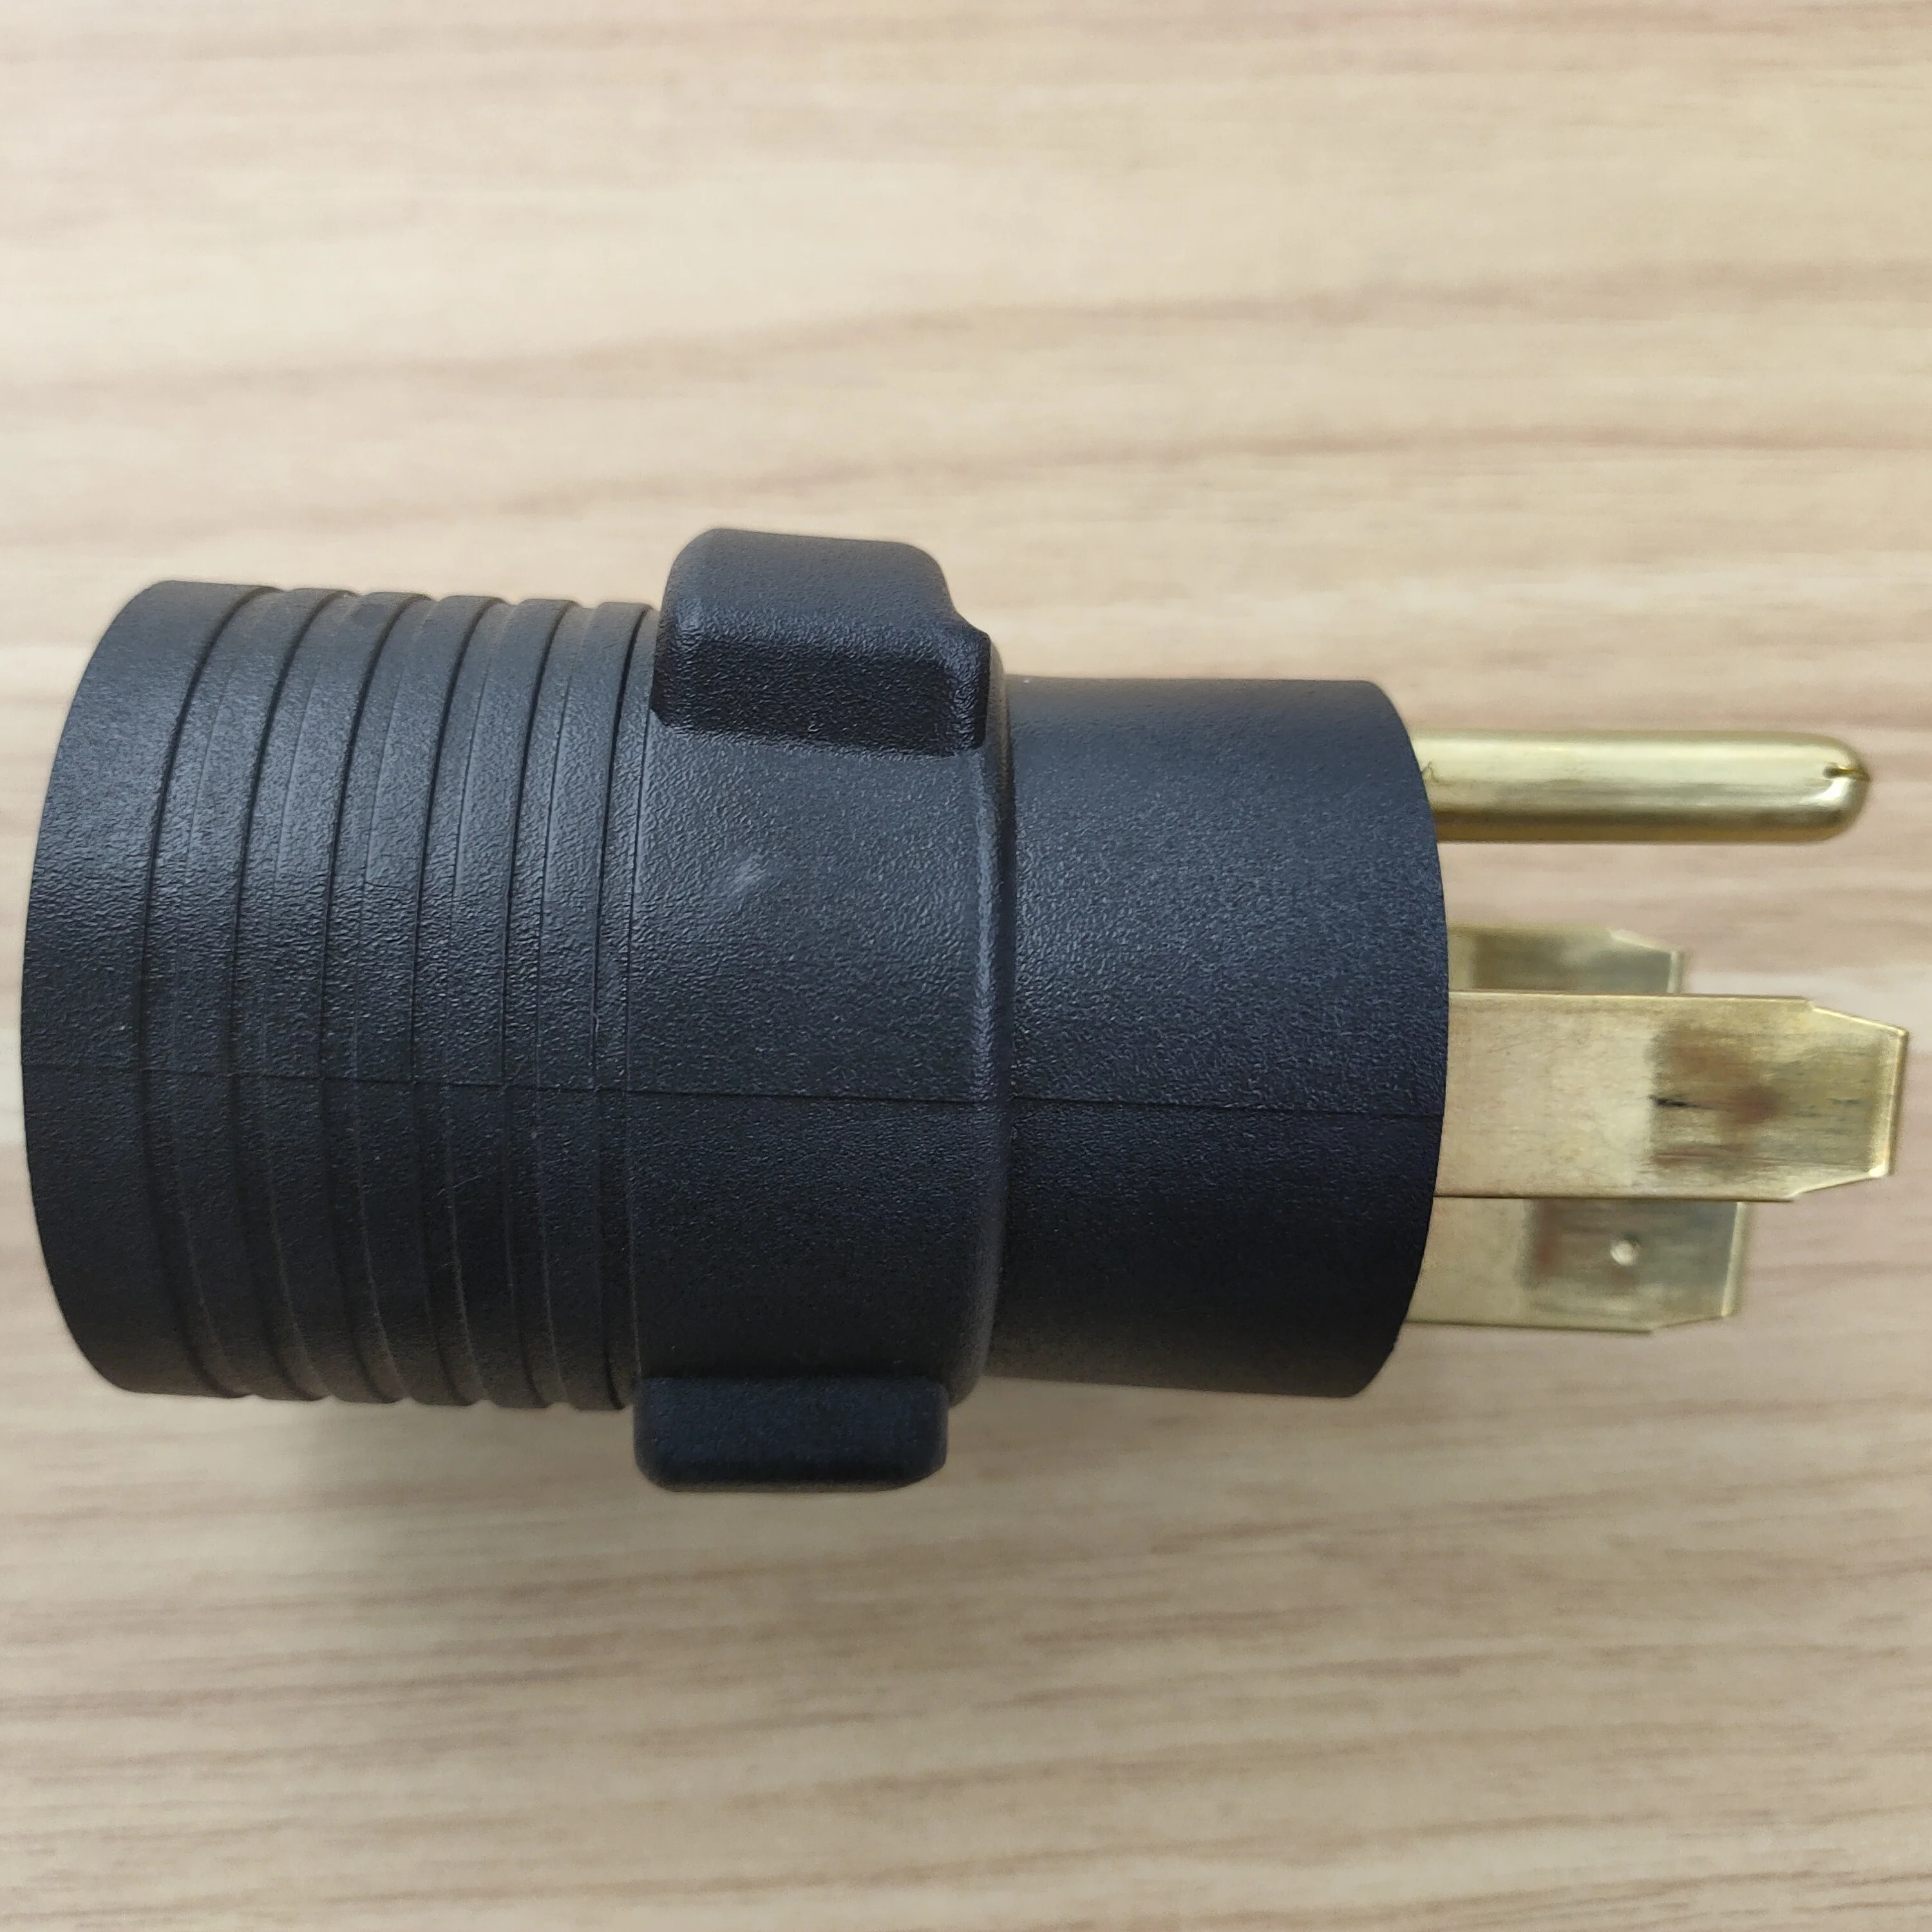 XUANHUA NEMA 6-50P to 14-50R 240V 50 Amp Welder Dryer EV Charger Compact Power Cord Adapter Connector Plug 